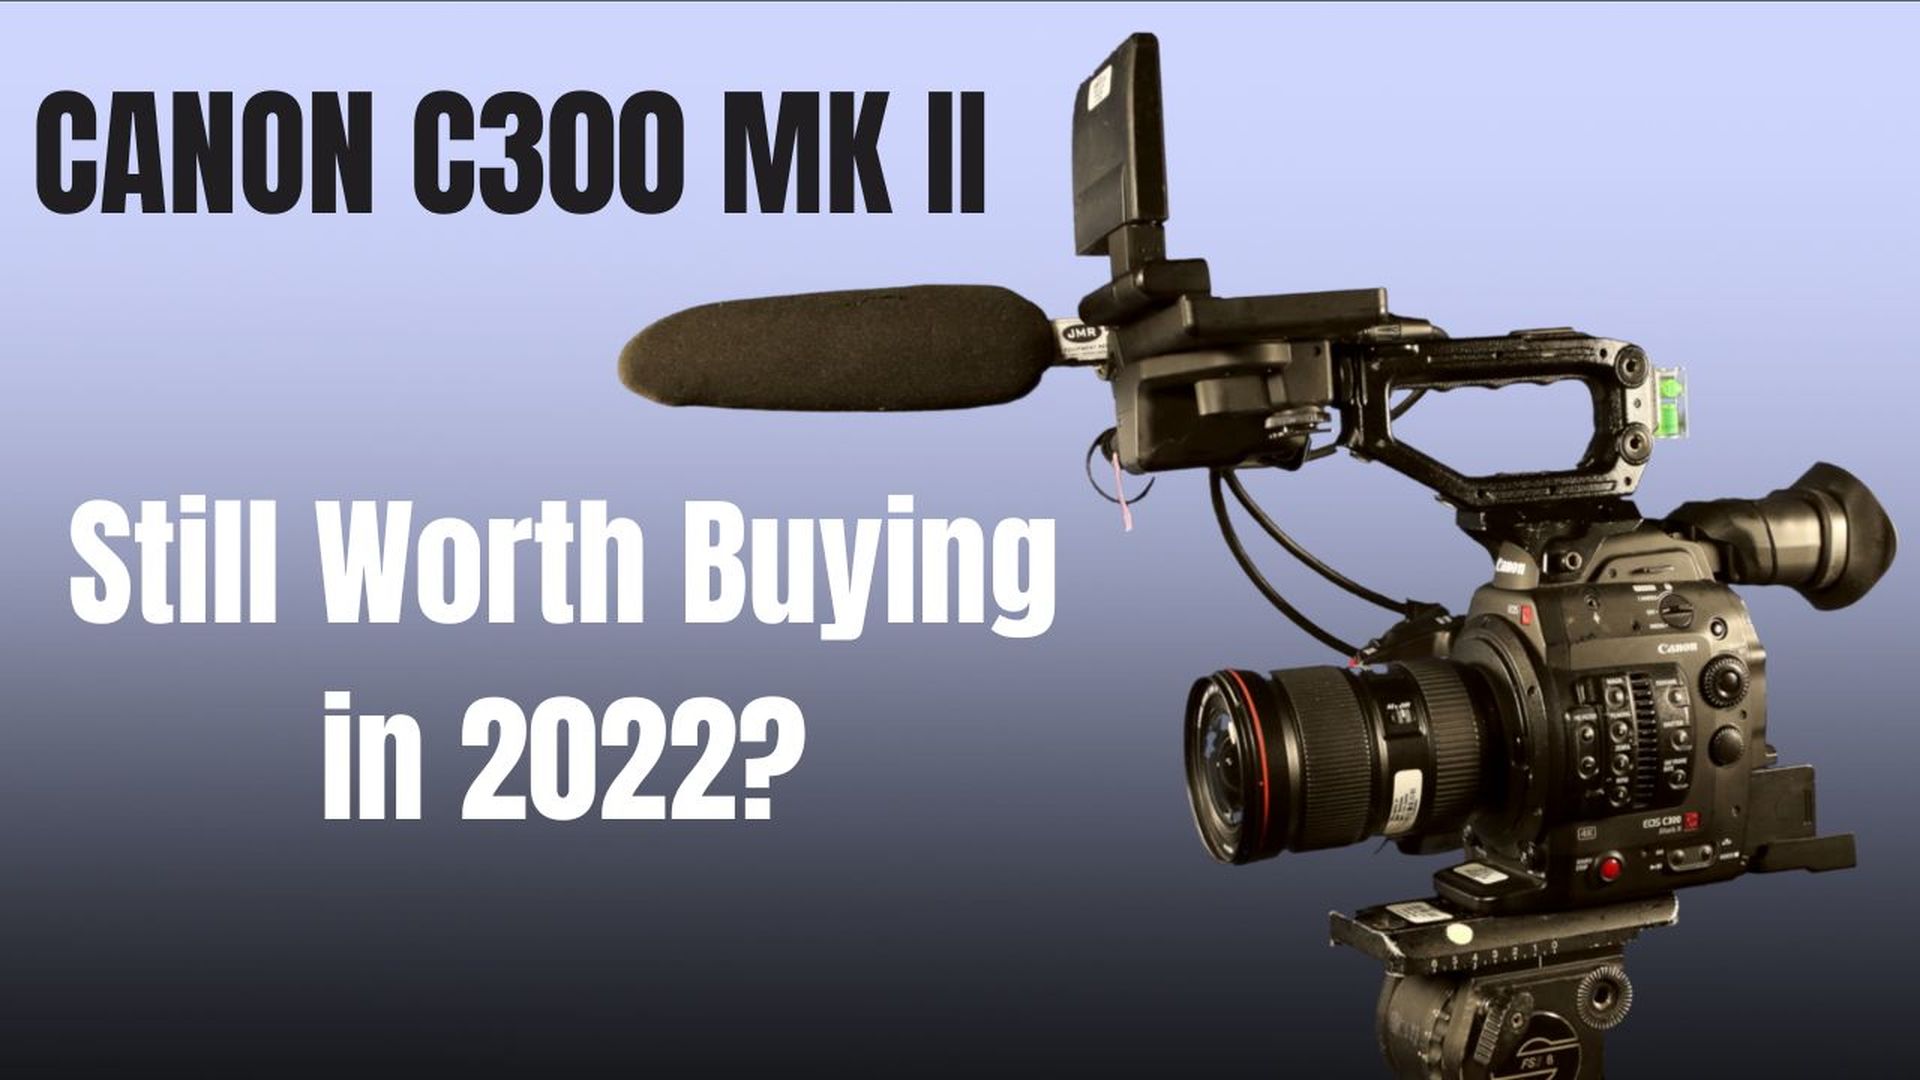 Episode 1204: Canon C300 Mark II Review